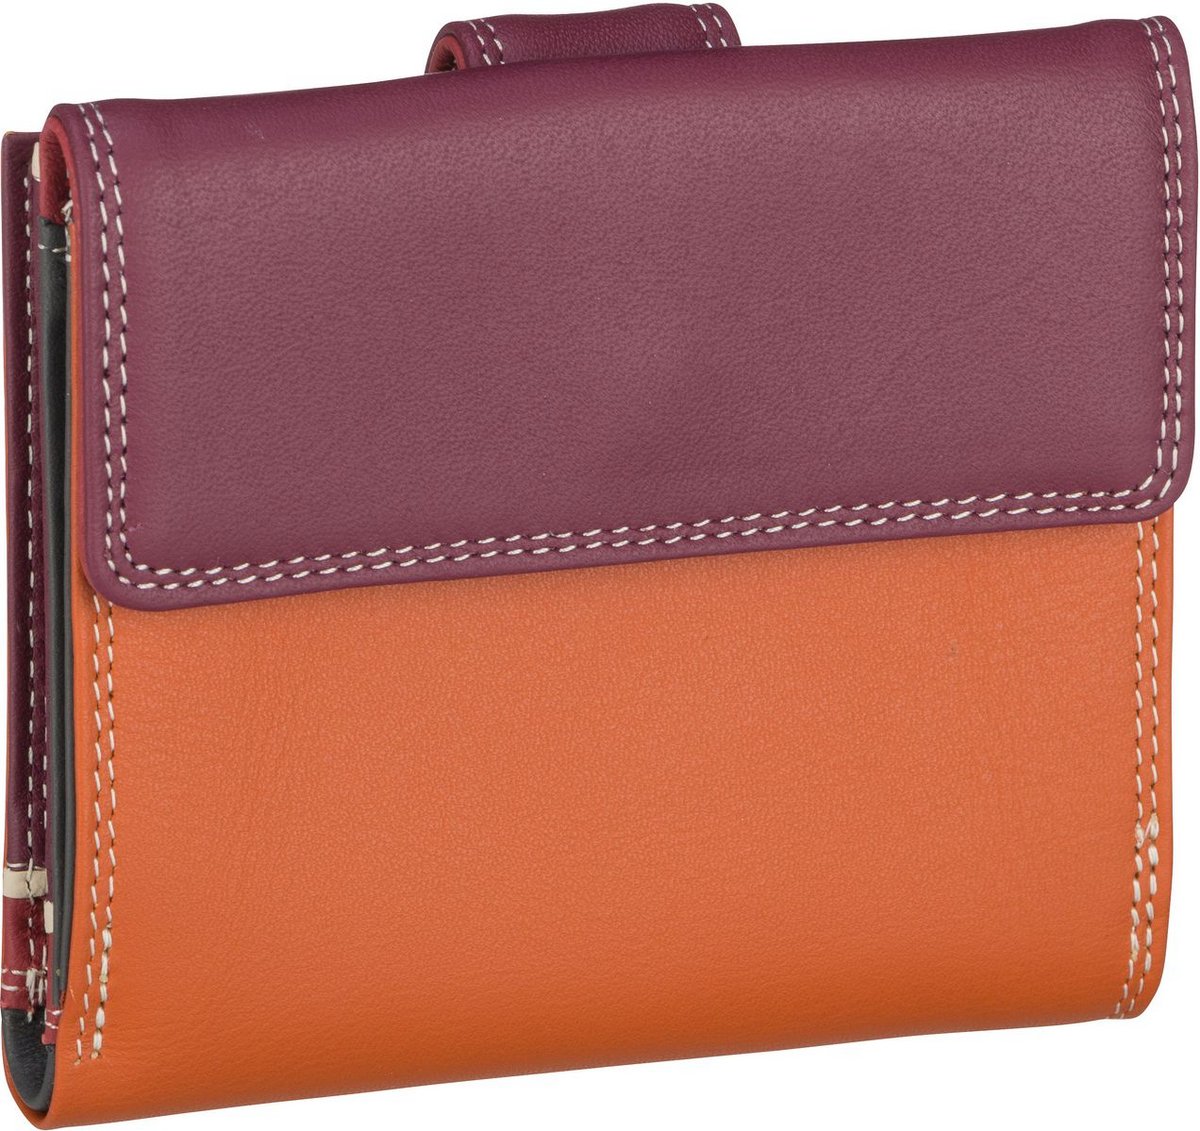 Mywalit Tab and Flap Wallet   Taschenkaufhaus.de